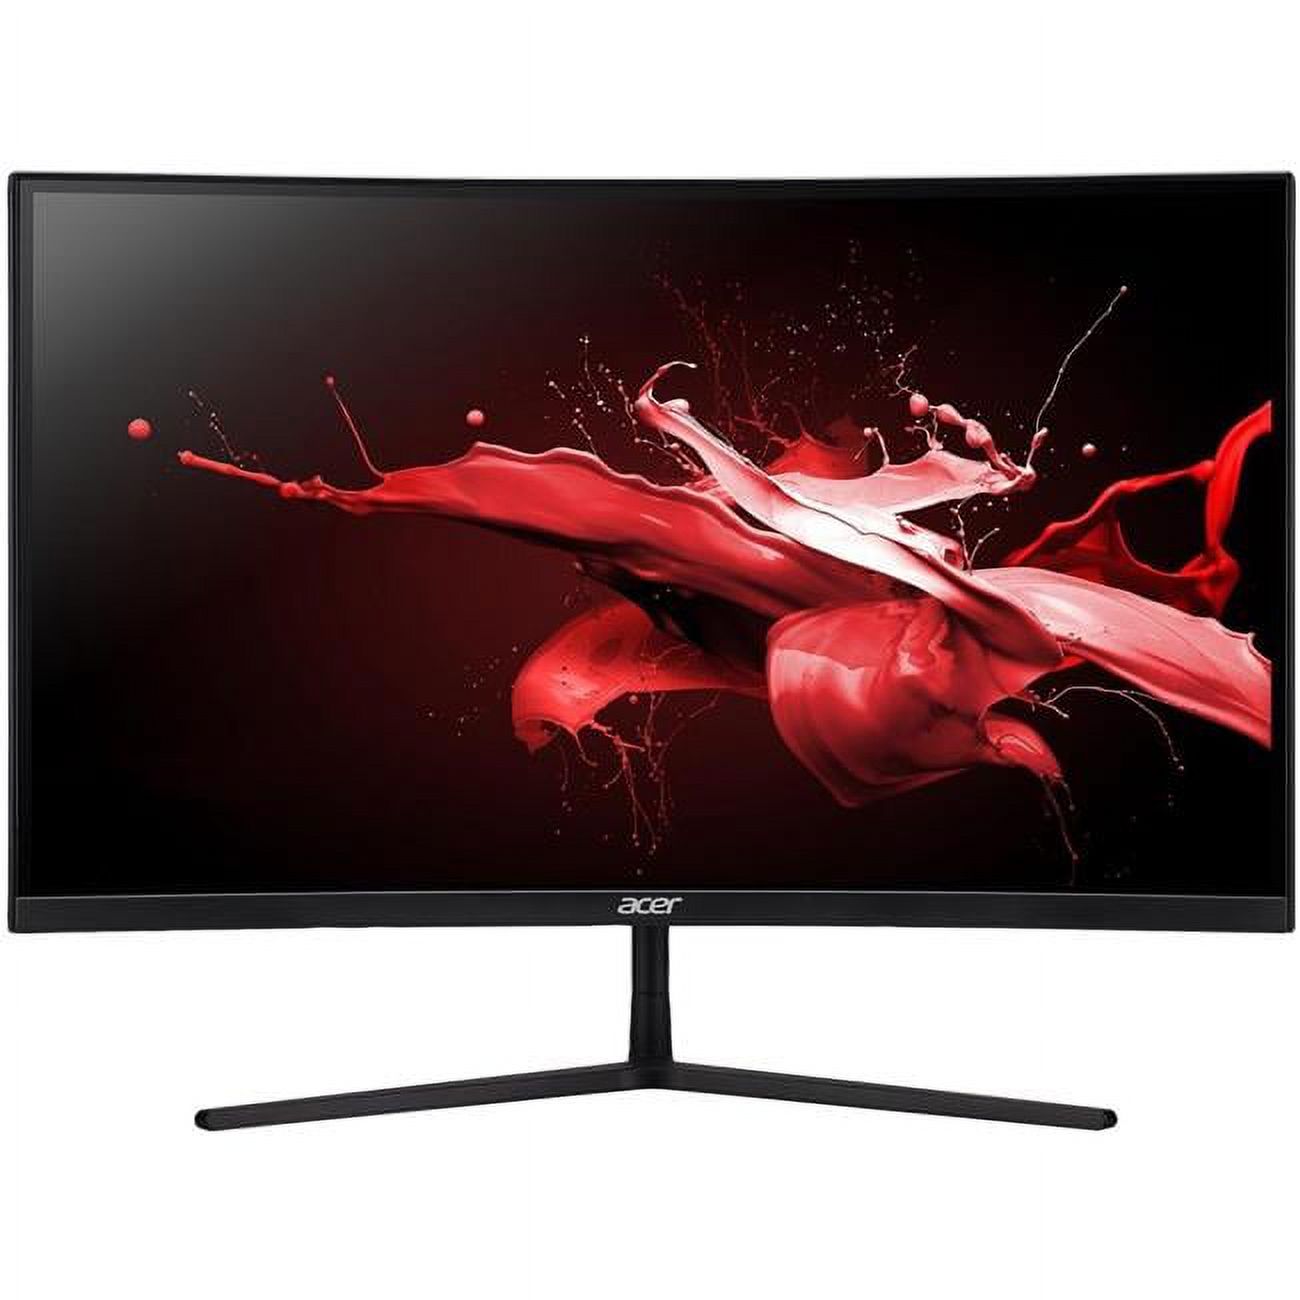 Acer 27" Curved Widescreen 2K WQHD 144Hz Gaming Monitor - AMD Radeon FreeSync 2 Technology - 2560 x 1440 WQHD 2K Resolution - 144Hz Refresh Rate - 4ms (G to G) Response Time - Tilt Adjustable - image 1 of 4